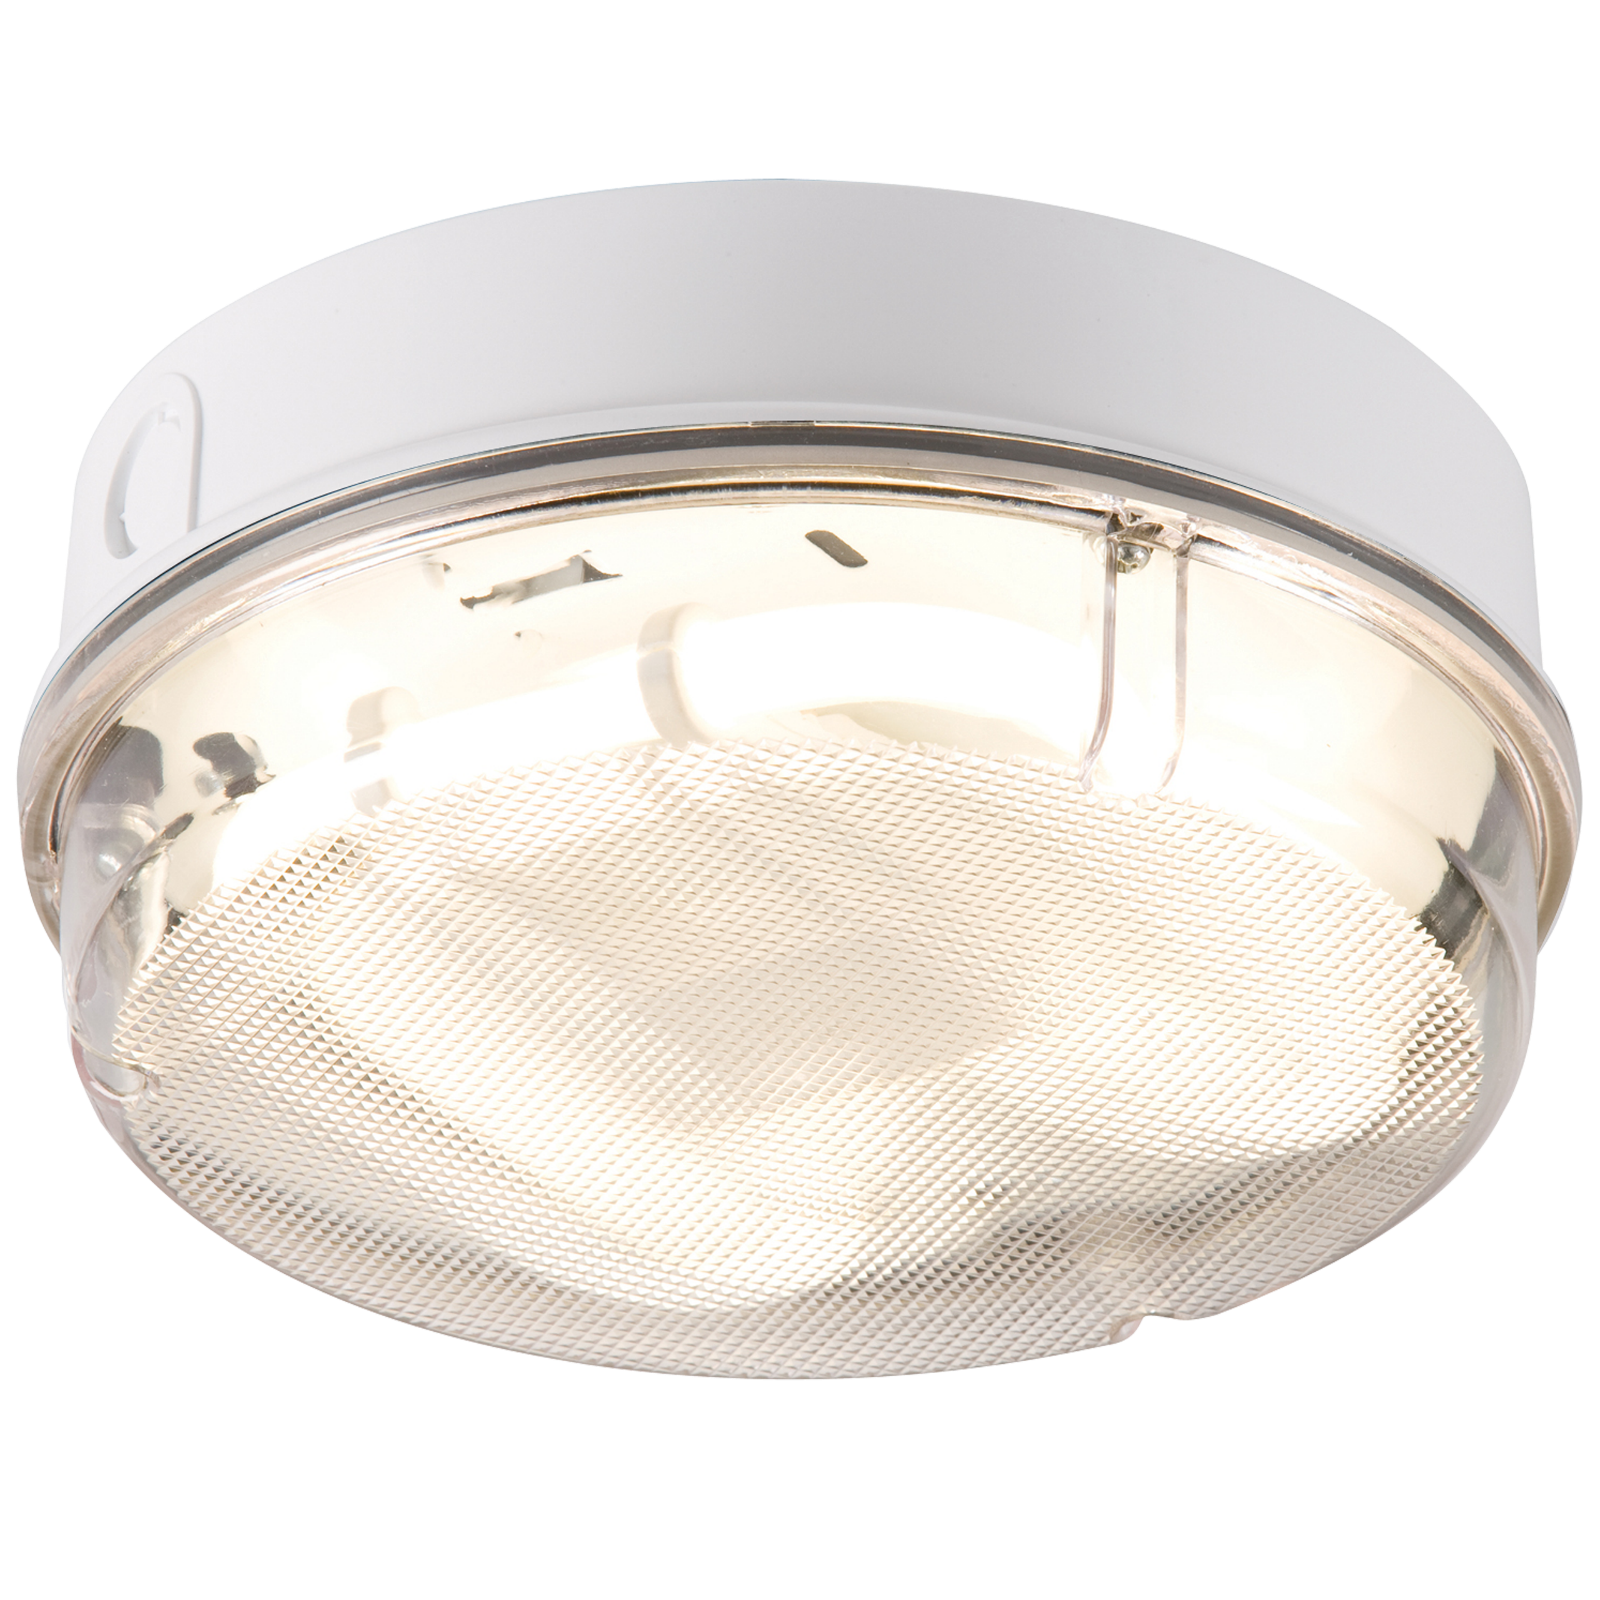 IP65 16W HF Round Bulkhead With Prismatic Diffuser And White Base - TPR16WPHF 